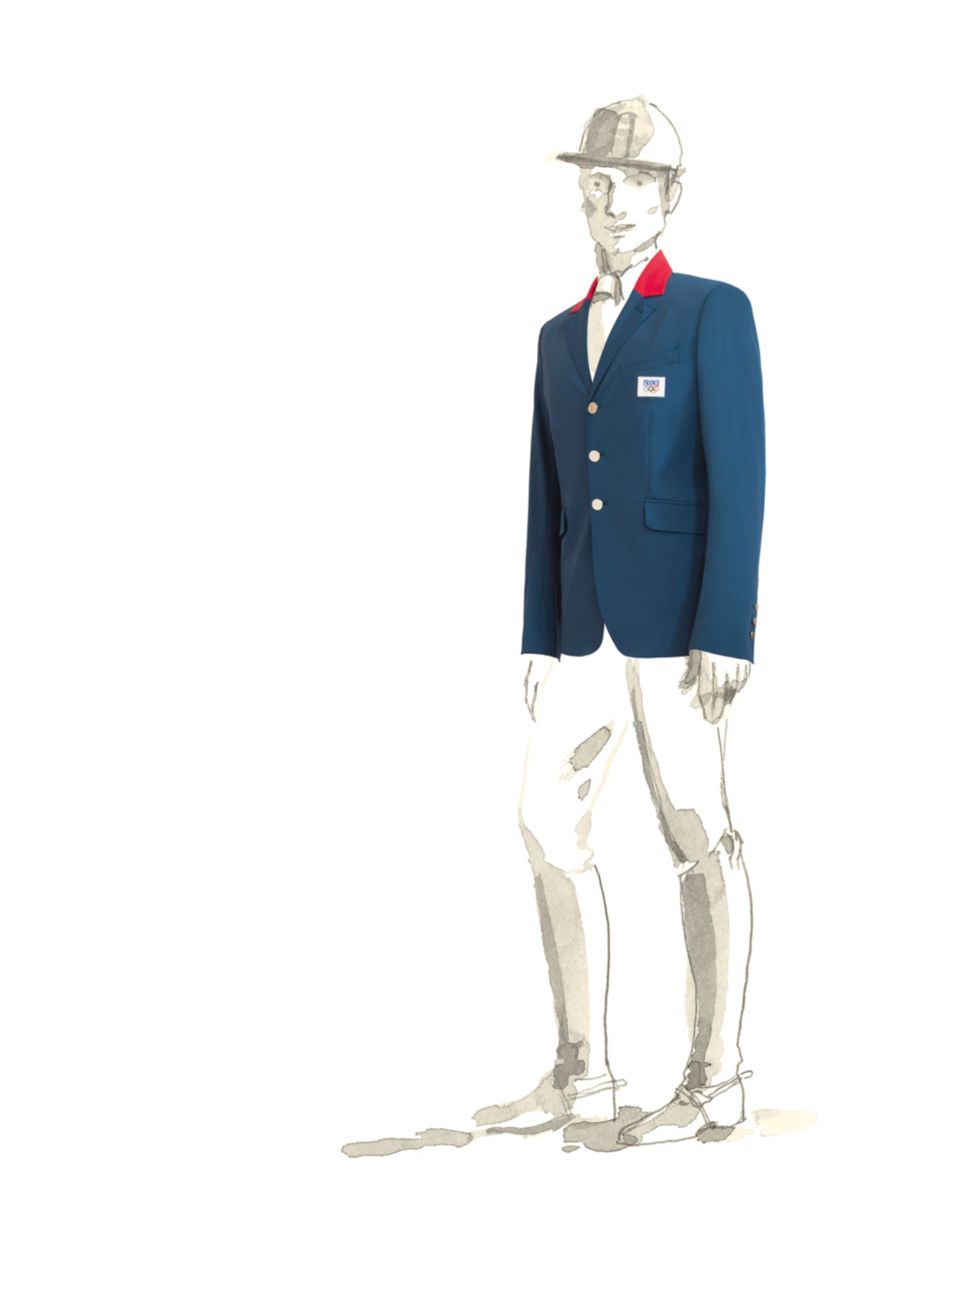 <p>The <a href="http://www.elleuk.com/catwalk/designer-a-z/hermes/autumn-winter-2012">Hermes</a> equestrian jacket for the French Olympic team, London Olmypics 2012</p>